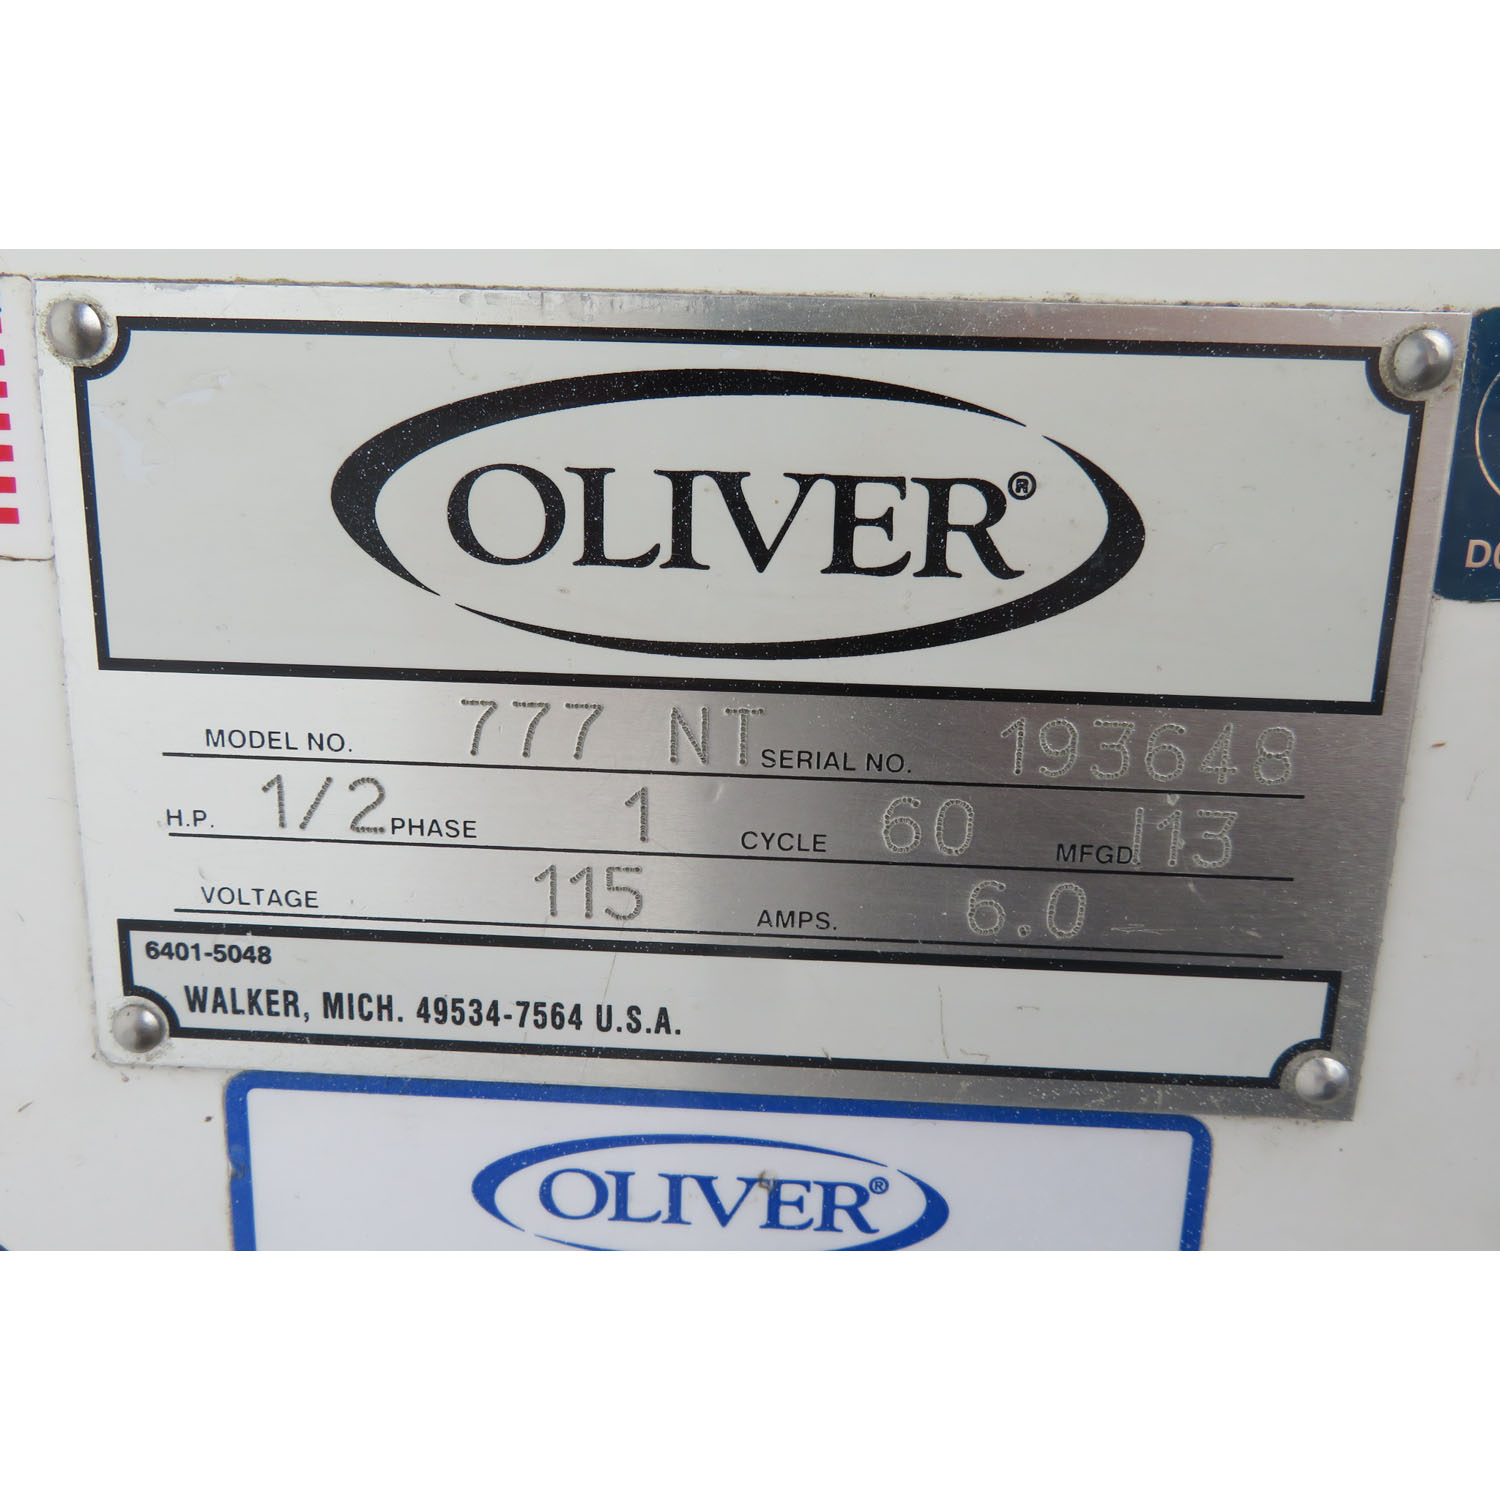 Oliver 777NT Bread Slicer 7/16" Slices, Used Great Condition image 5